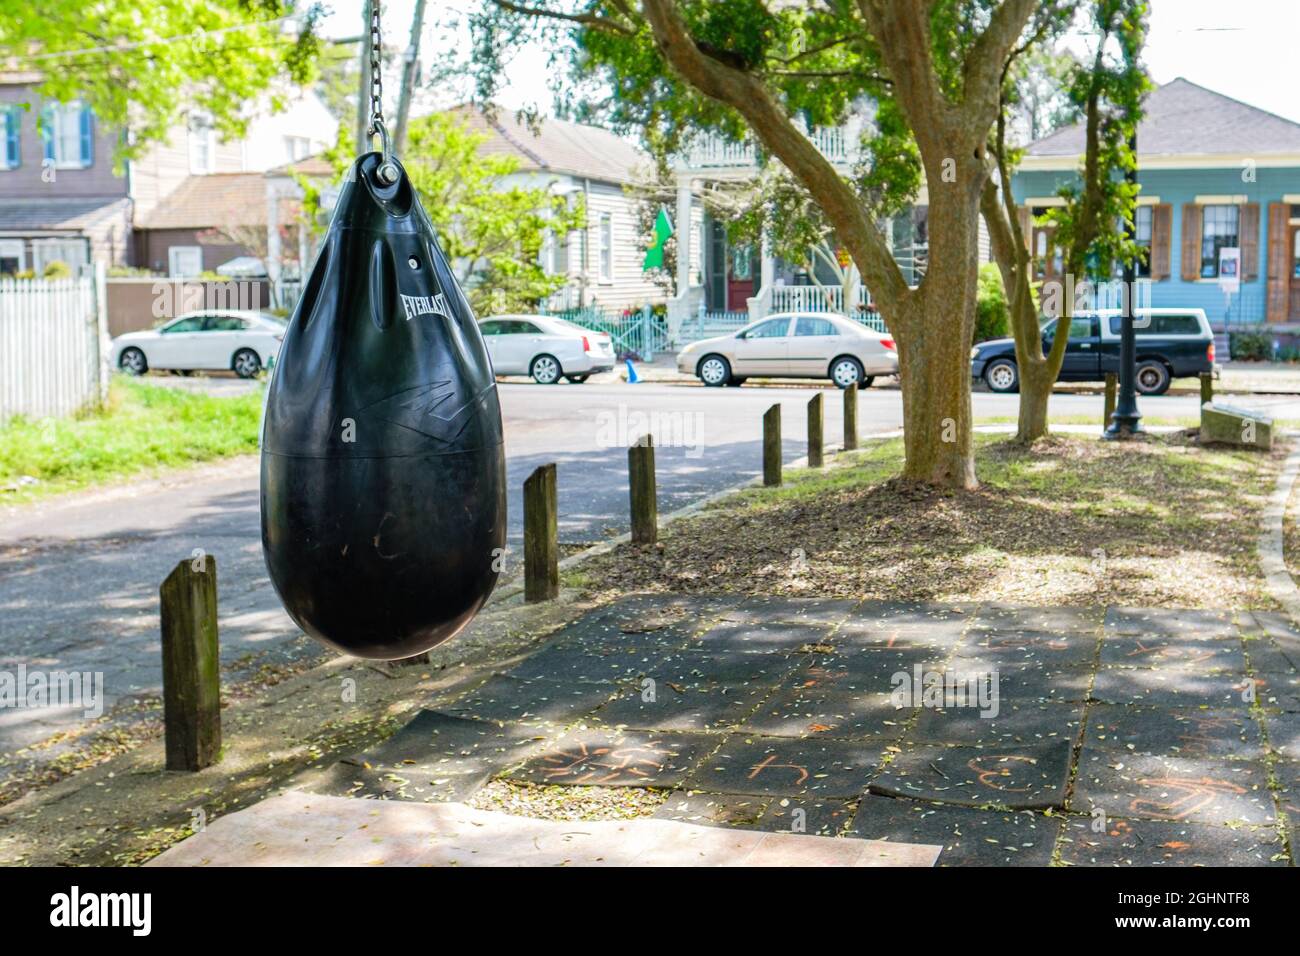 NEW ORLEANS, LA, USA - MARCH 15, 2020: Outdoor punching bag in Algiers park Stock Photo